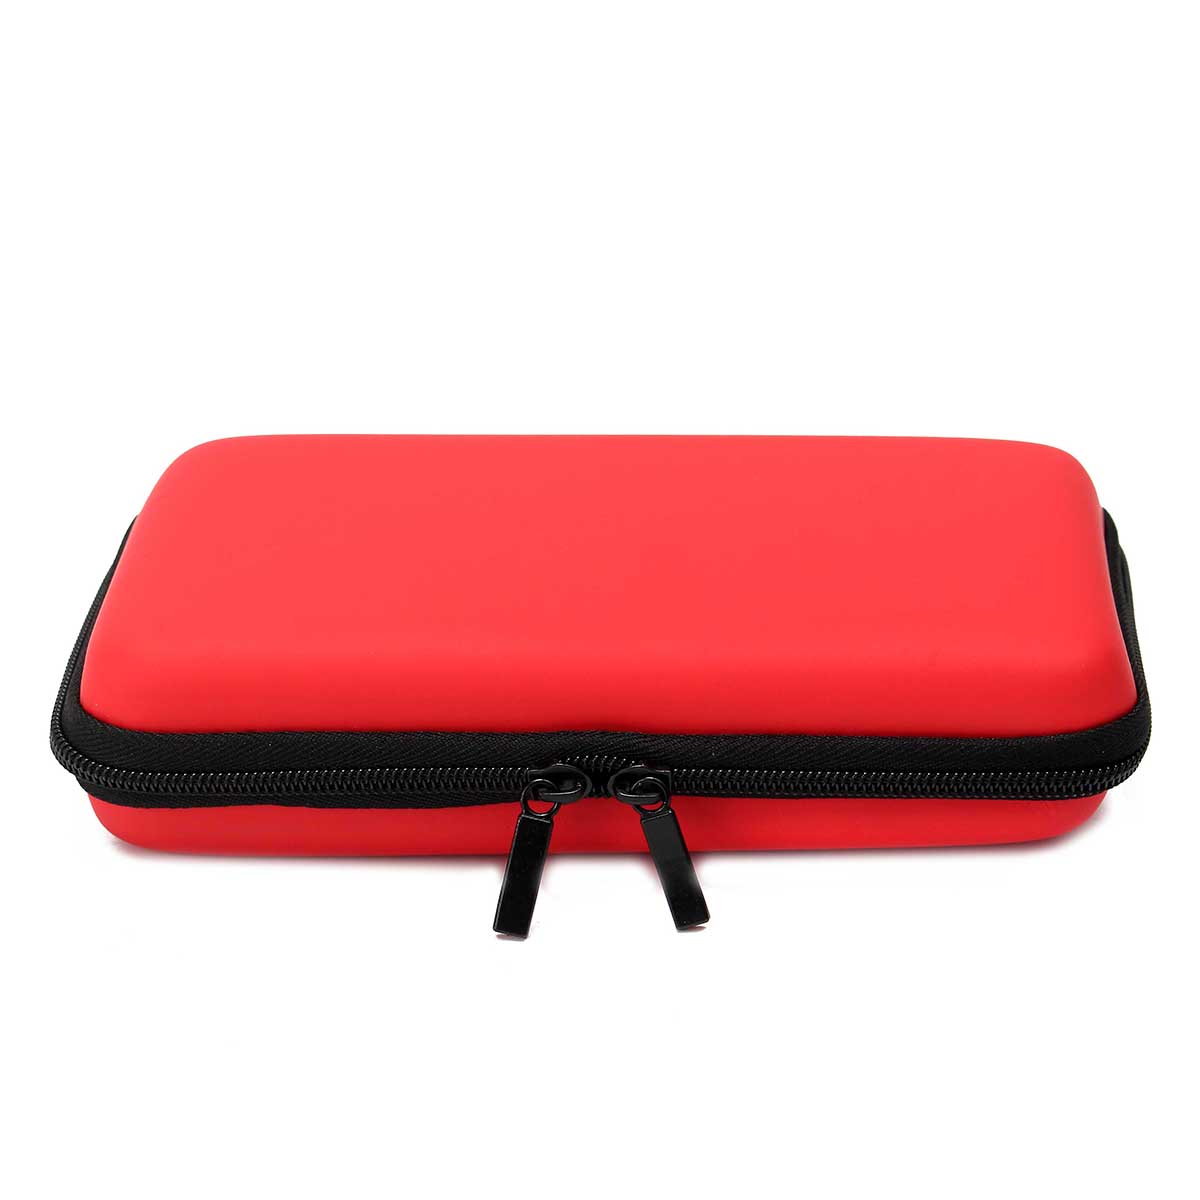 EVA Hard Protective Carrying Case Cover Handle Bag For Nintendo New 2DS LL/XL